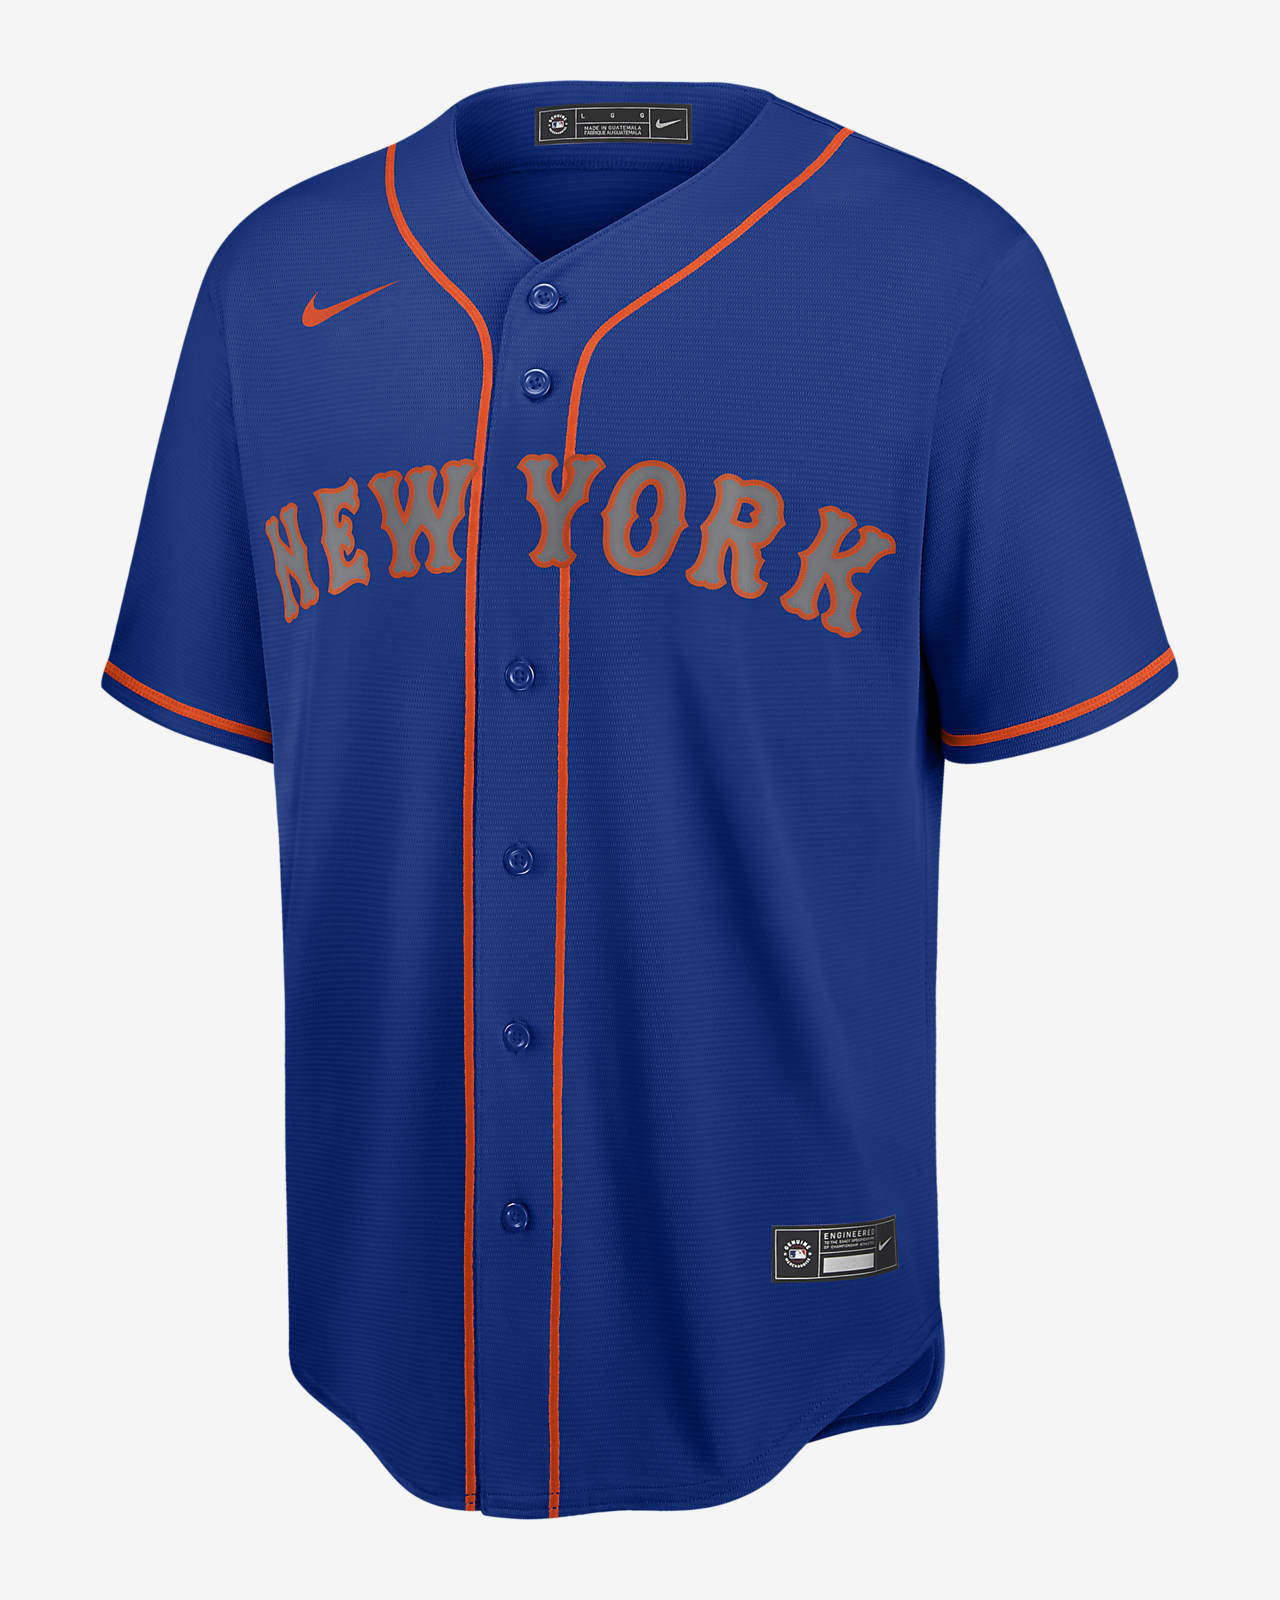 degrom youth jersey